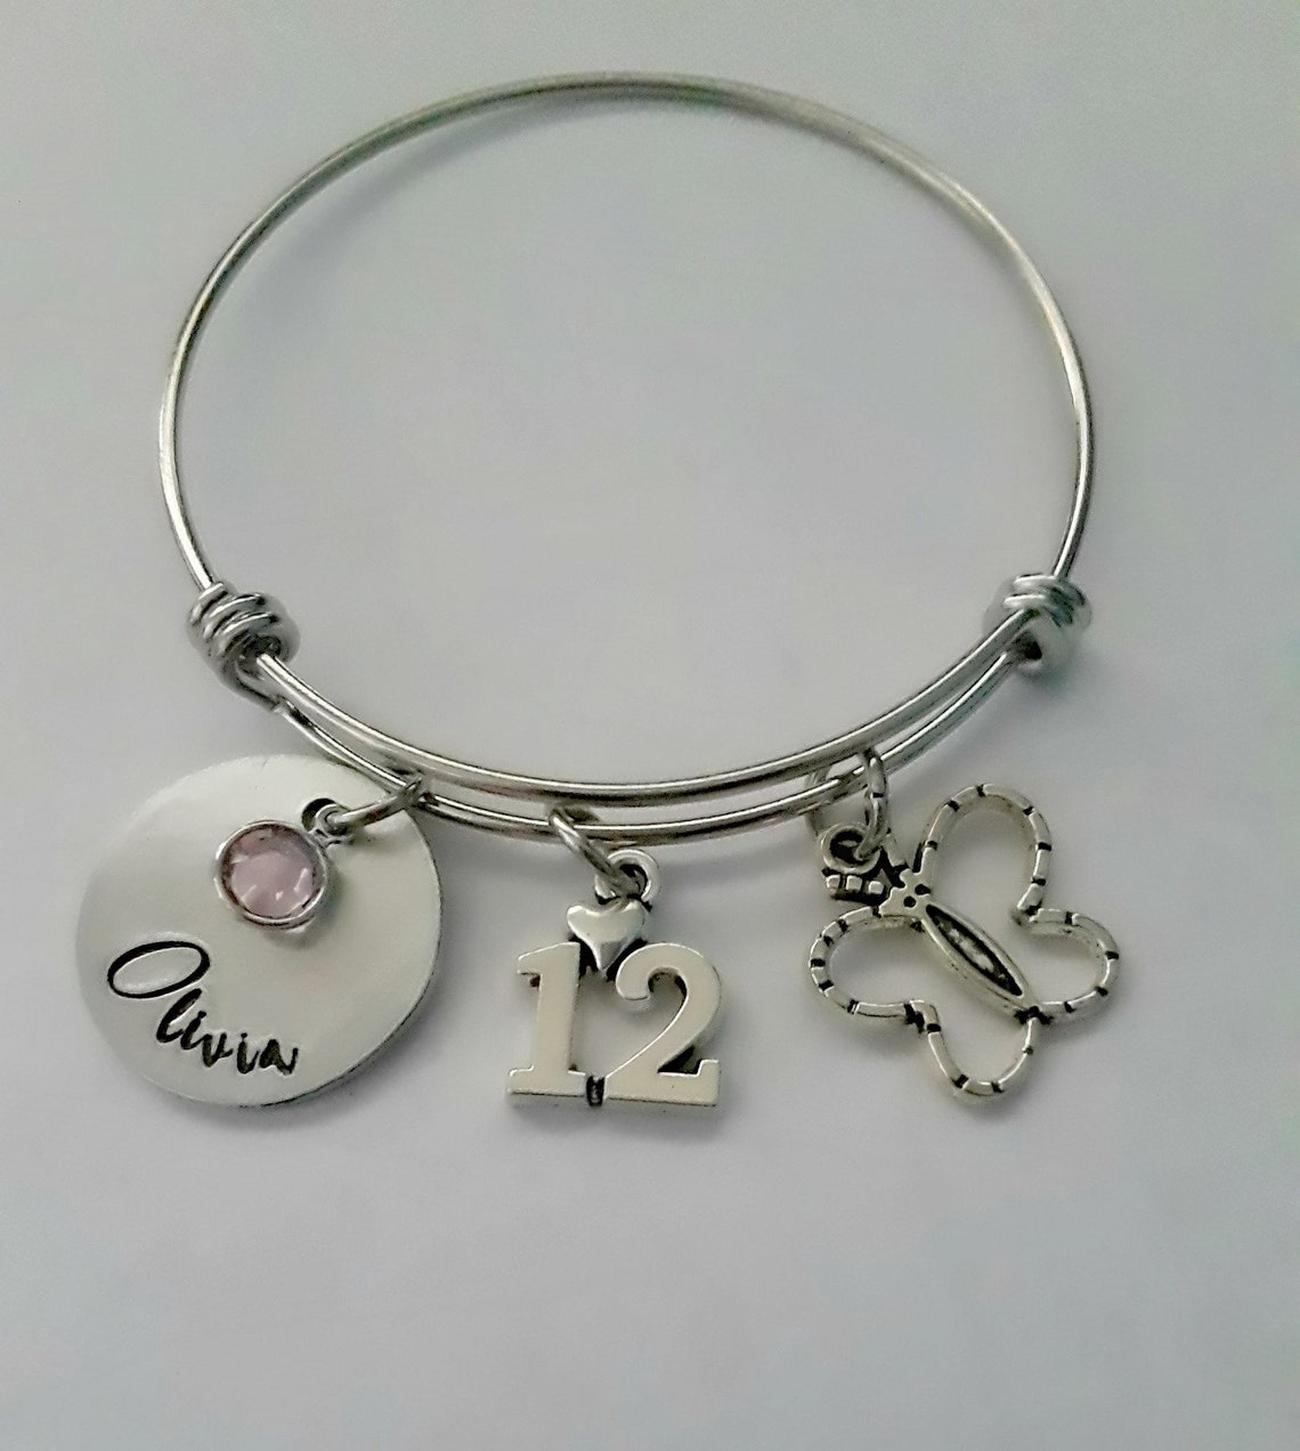 Personalized Happy 12th Birthday Gift for 12 Year Old Girl Expandable Silver Charm Bracelet Adjustable